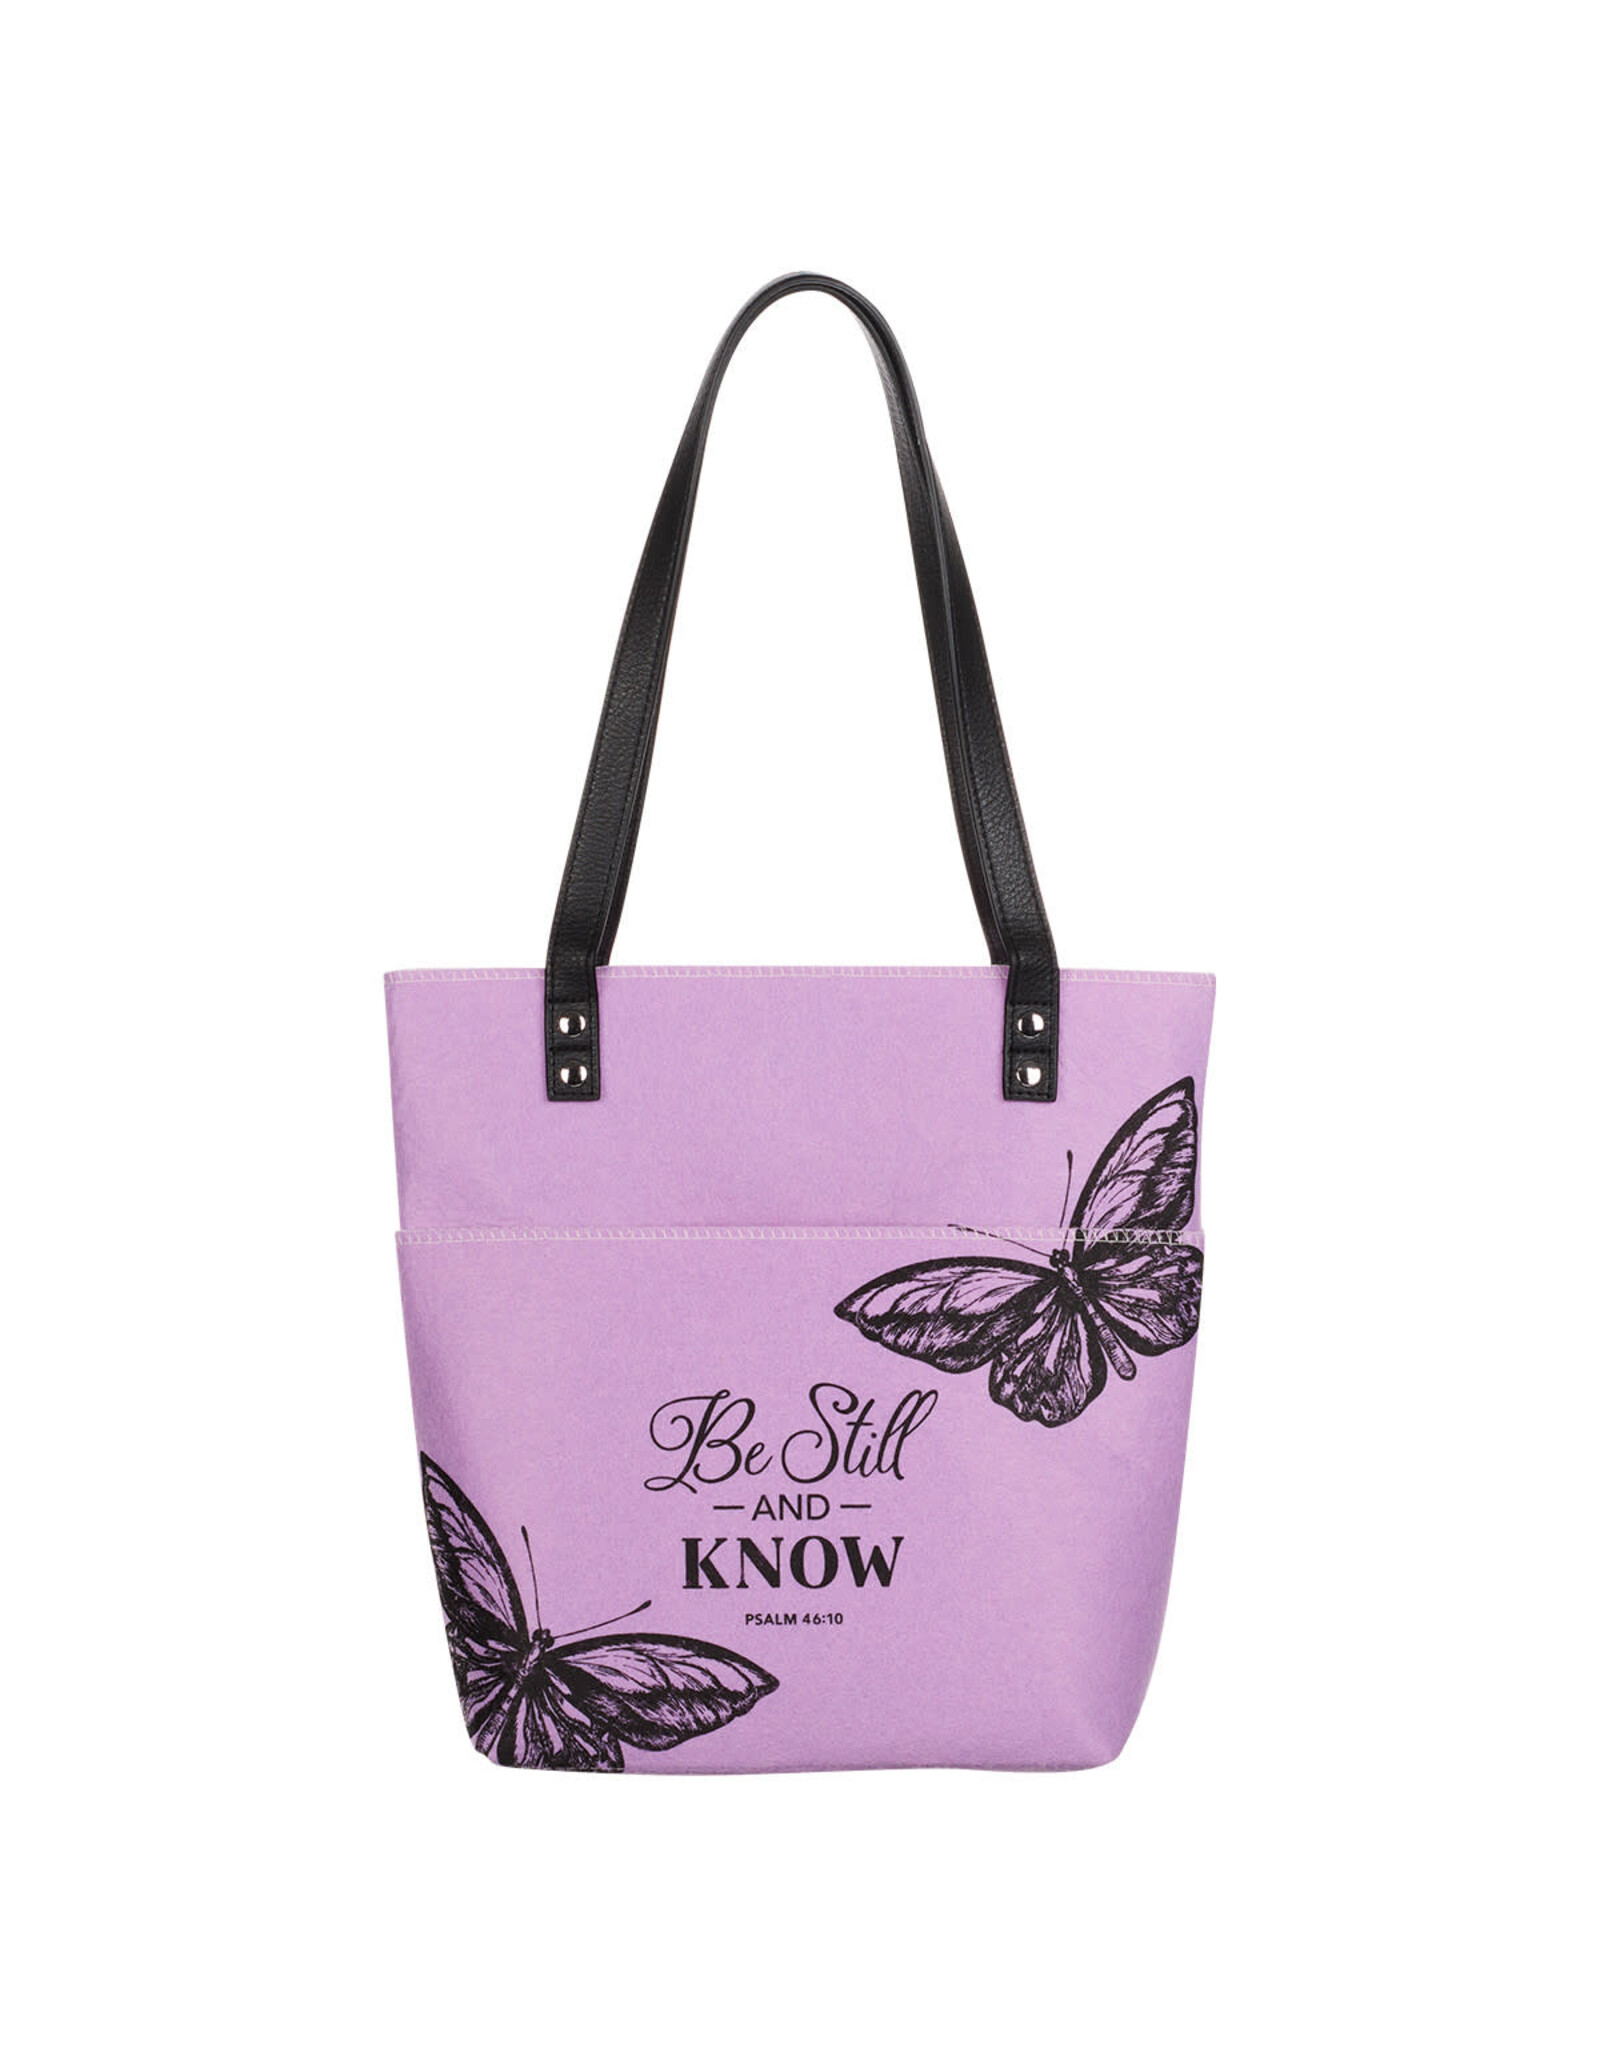 Christian Art Gifts Tote Bag Purse - Be Still and Know Purple Butterfly Fashion Felt